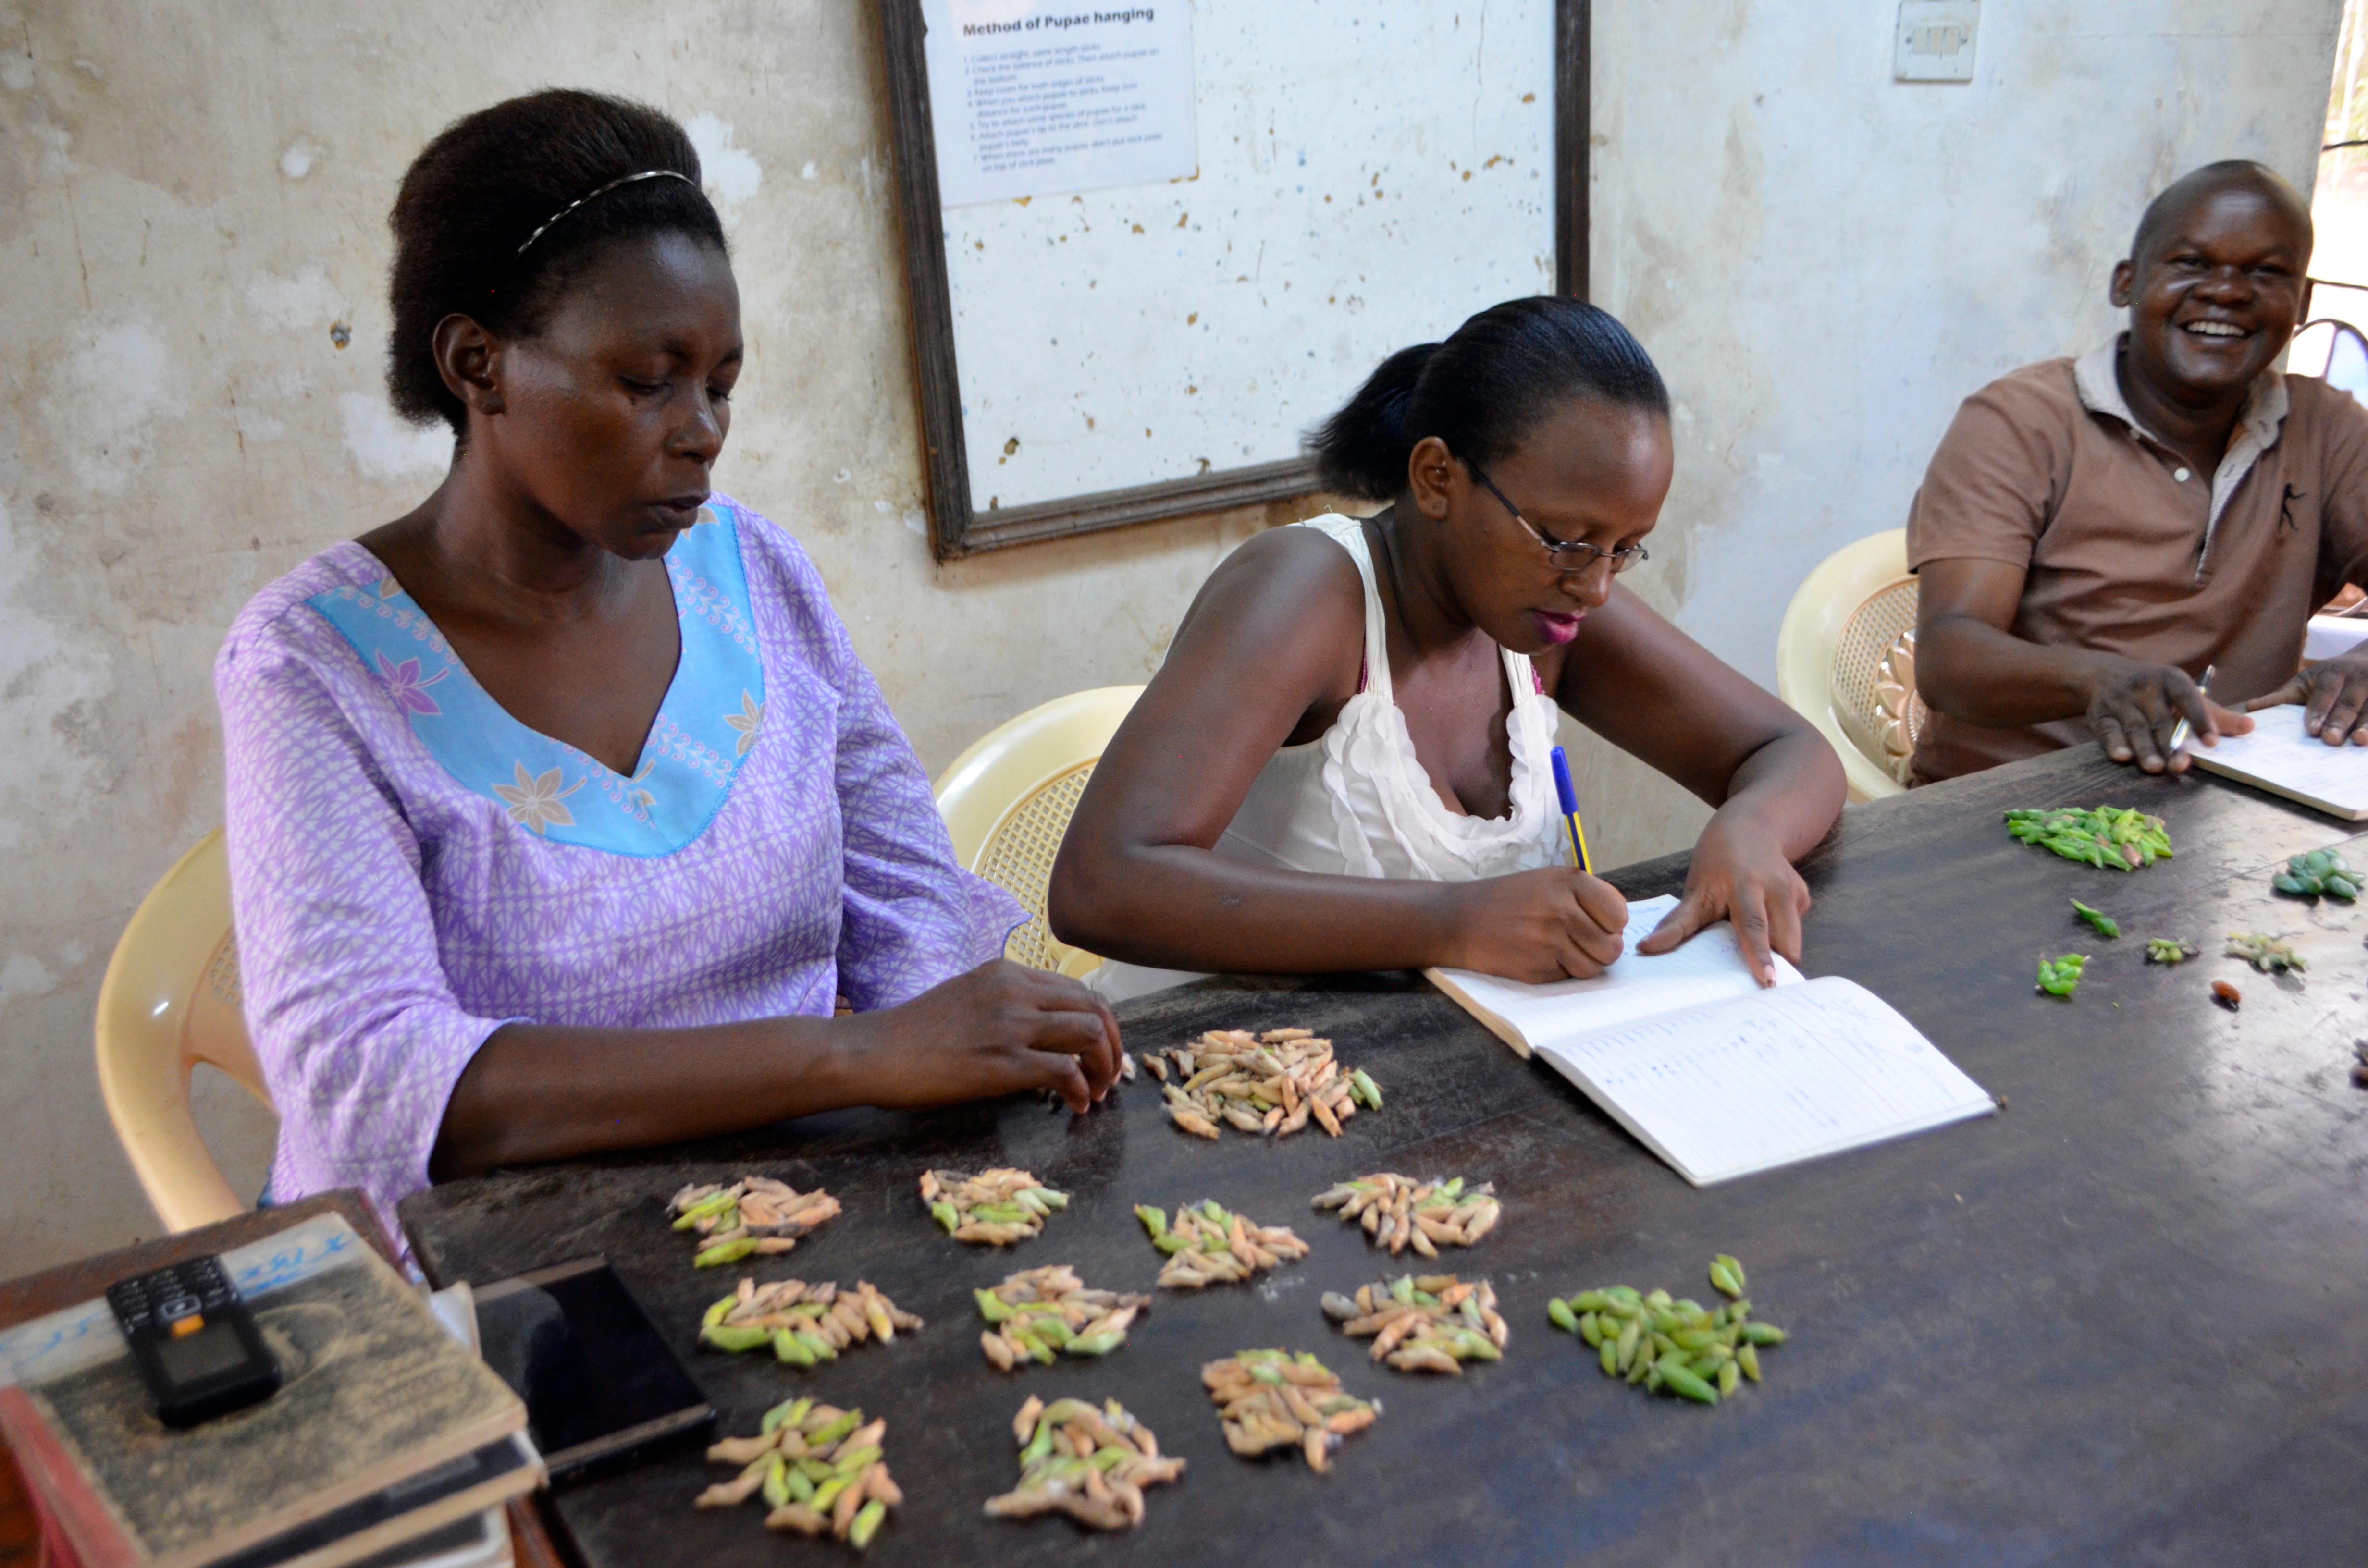 Sorting of butterfly pupae at Kipepeo Centre.